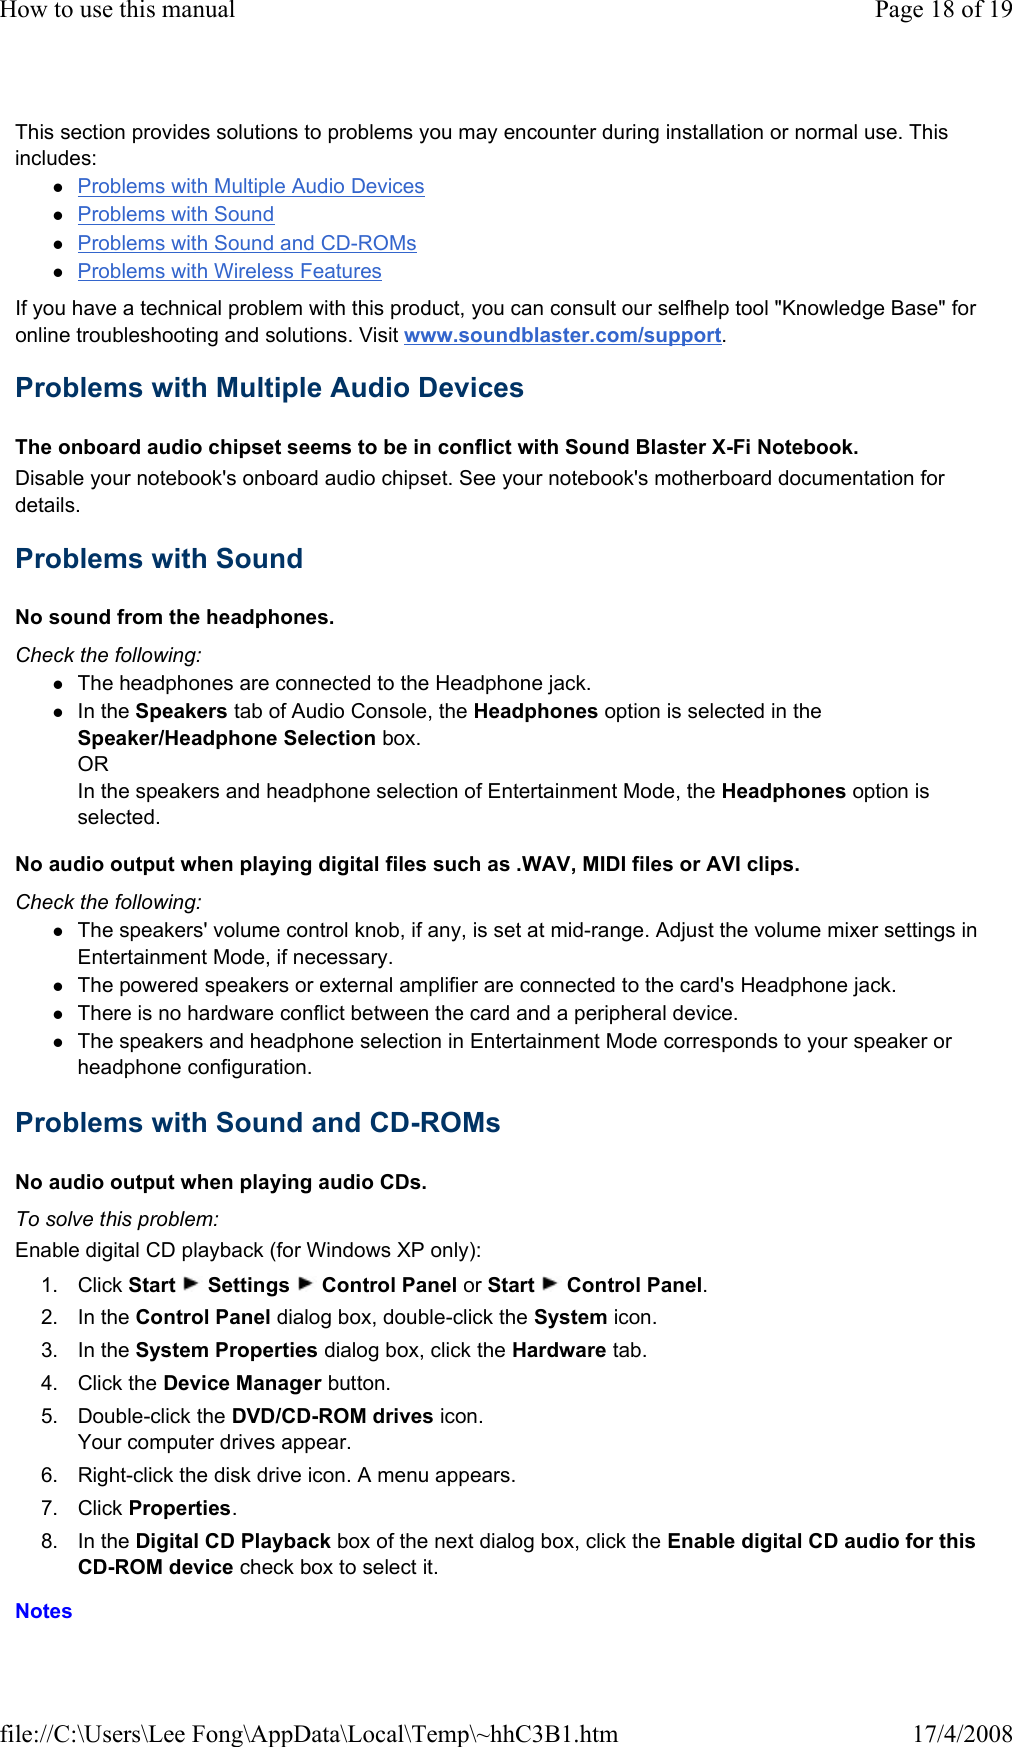 This section provides solutions to problems you may encounter during installation or normal use. This includes:  Problems with Multiple Audio Devices  Problems with Sound  Problems with Sound and CD-ROMs  Problems with Wireless Features  If you have a technical problem with this product, you can consult our selfhelp tool &quot;Knowledge Base&quot; for online troubleshooting and solutions. Visit www.soundblaster.com/support.  Problems with Multiple Audio Devices  The onboard audio chipset seems to be in conflict with Sound Blaster X-Fi Notebook.  Disable your notebook&apos;s onboard audio chipset. See your notebook&apos;s motherboard documentation for details.  Problems with Sound  No sound from the headphones.  Check the following:  The headphones are connected to the Headphone jack.  In the Speakers tab of Audio Console, the Headphones option is selected in the Speaker/Headphone Selection box. OR In the speakers and headphone selection of Entertainment Mode, the Headphones option is selected.  No audio output when playing digital files such as .WAV, MIDI files or AVI clips.  Check the following:  The speakers&apos; volume control knob, if any, is set at mid-range. Adjust the volume mixer settings in Entertainment Mode, if necessary.  The powered speakers or external amplifier are connected to the card&apos;s Headphone jack.  There is no hardware conflict between the card and a peripheral device.  The speakers and headphone selection in Entertainment Mode corresponds to your speaker or headphone configuration.  Problems with Sound and CD-ROMs  No audio output when playing audio CDs.  To solve this problem:  Enable digital CD playback (for Windows XP only):  1. Click Start   Settings   Control Panel or Start   Control Panel.  2. In the Control Panel dialog box, double-click the System icon.  3. In the System Properties dialog box, click the Hardware tab.  4. Click the Device Manager button.  5. Double-click the DVD/CD-ROM drives icon. Your computer drives appear.  6. Right-click the disk drive icon. A menu appears.  7. Click Properties.  8. In the Digital CD Playback box of the next dialog box, click the Enable digital CD audio for this CD-ROM device check box to select it.  Notes  Page 18 of 19How to use this manual17/4/2008file://C:\Users\Lee Fong\AppData\Local\Temp\~hhC3B1.htm